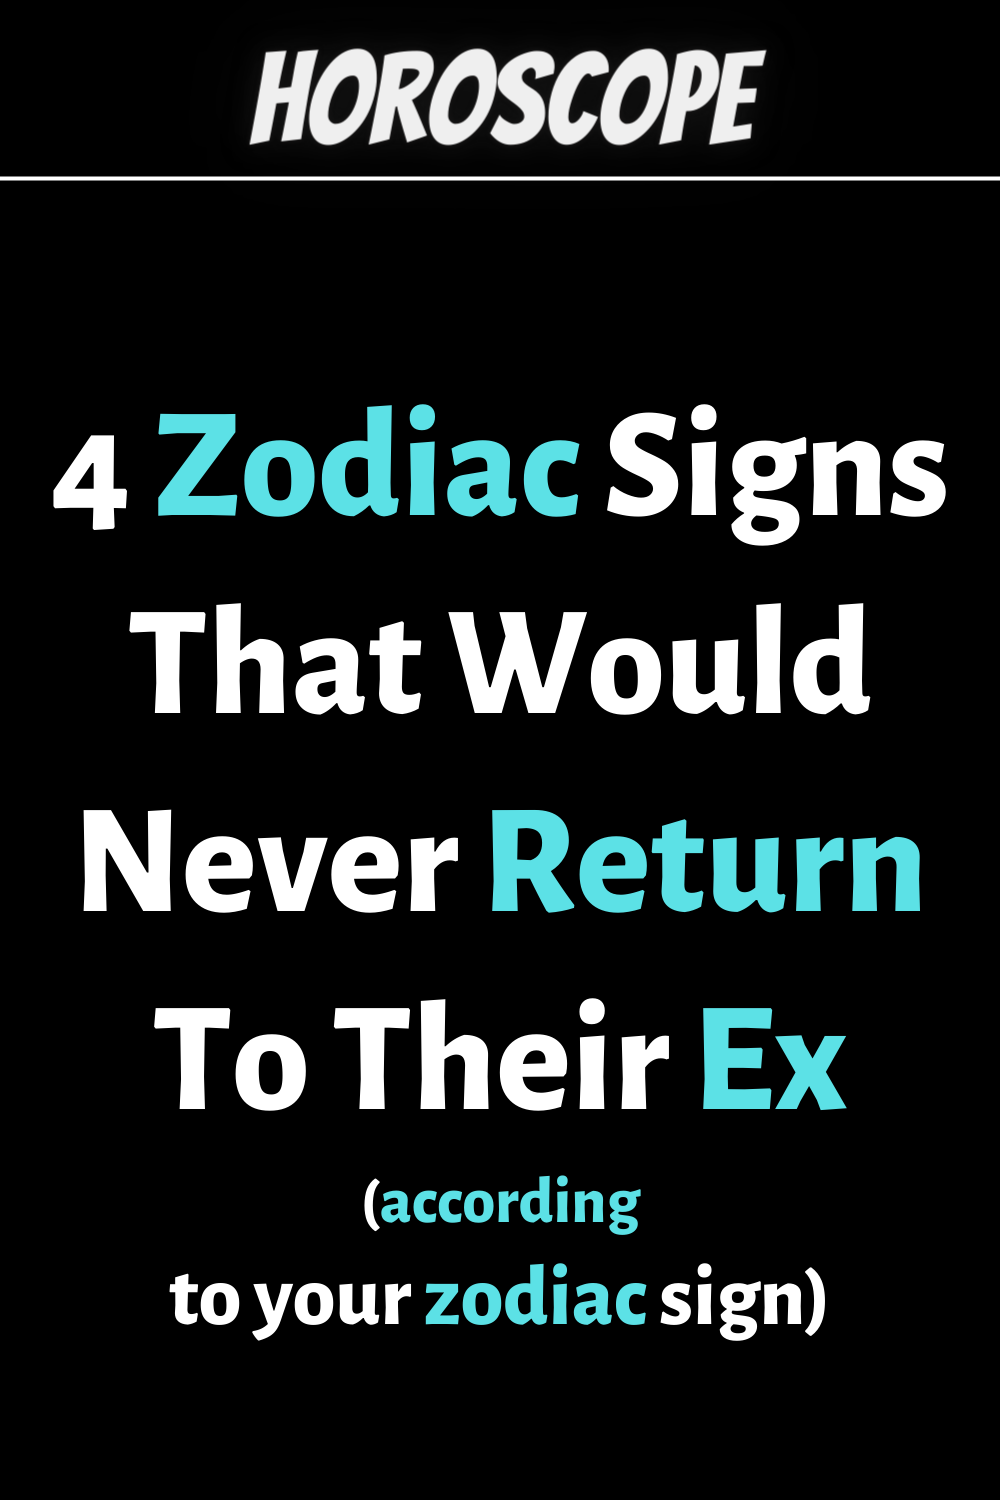 4 Zodiac Signs That Would Never Return To Their Ex